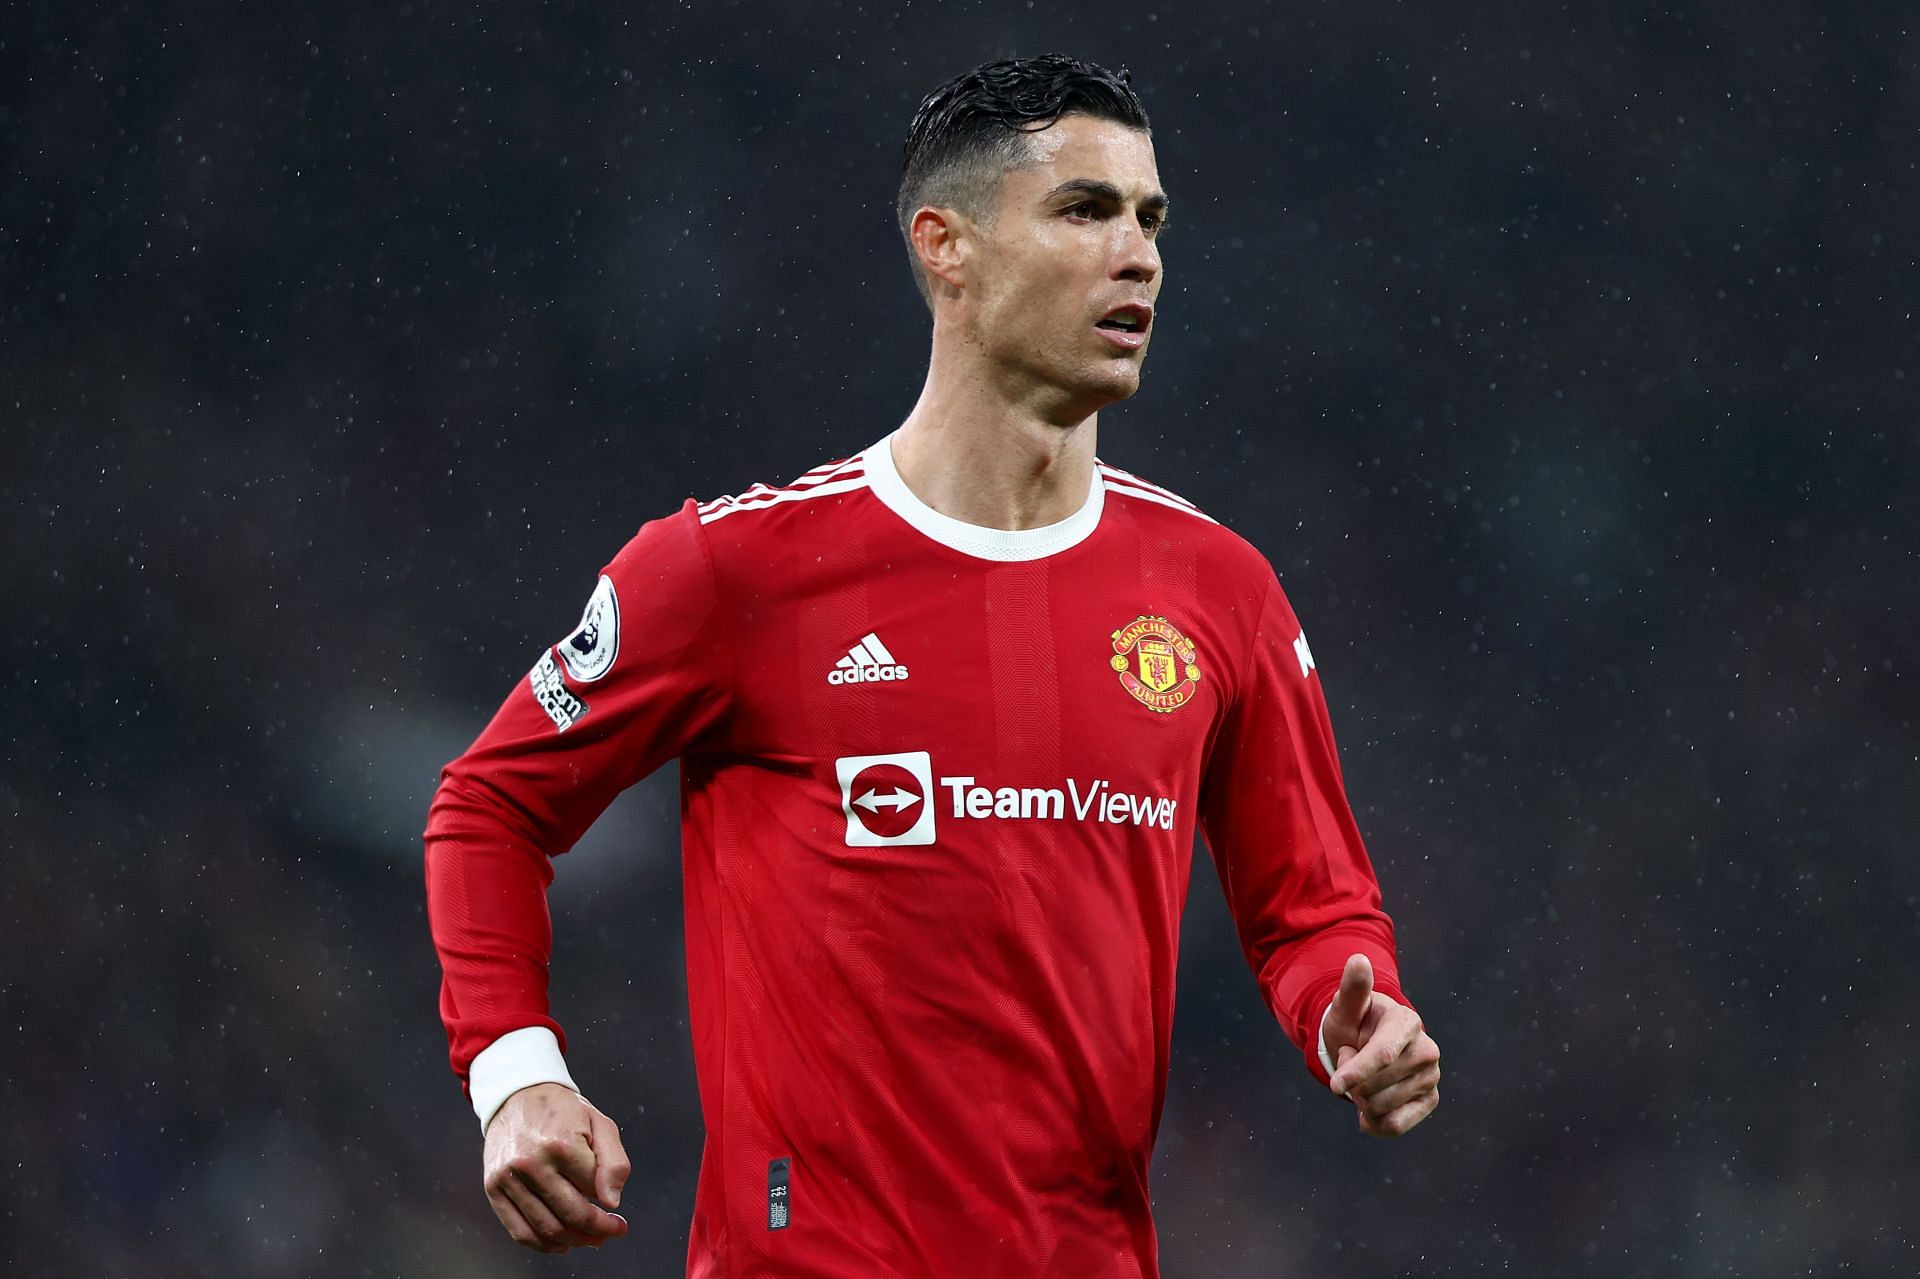 Cristiano Ronaldo looks set to leave Manchester United this summer.